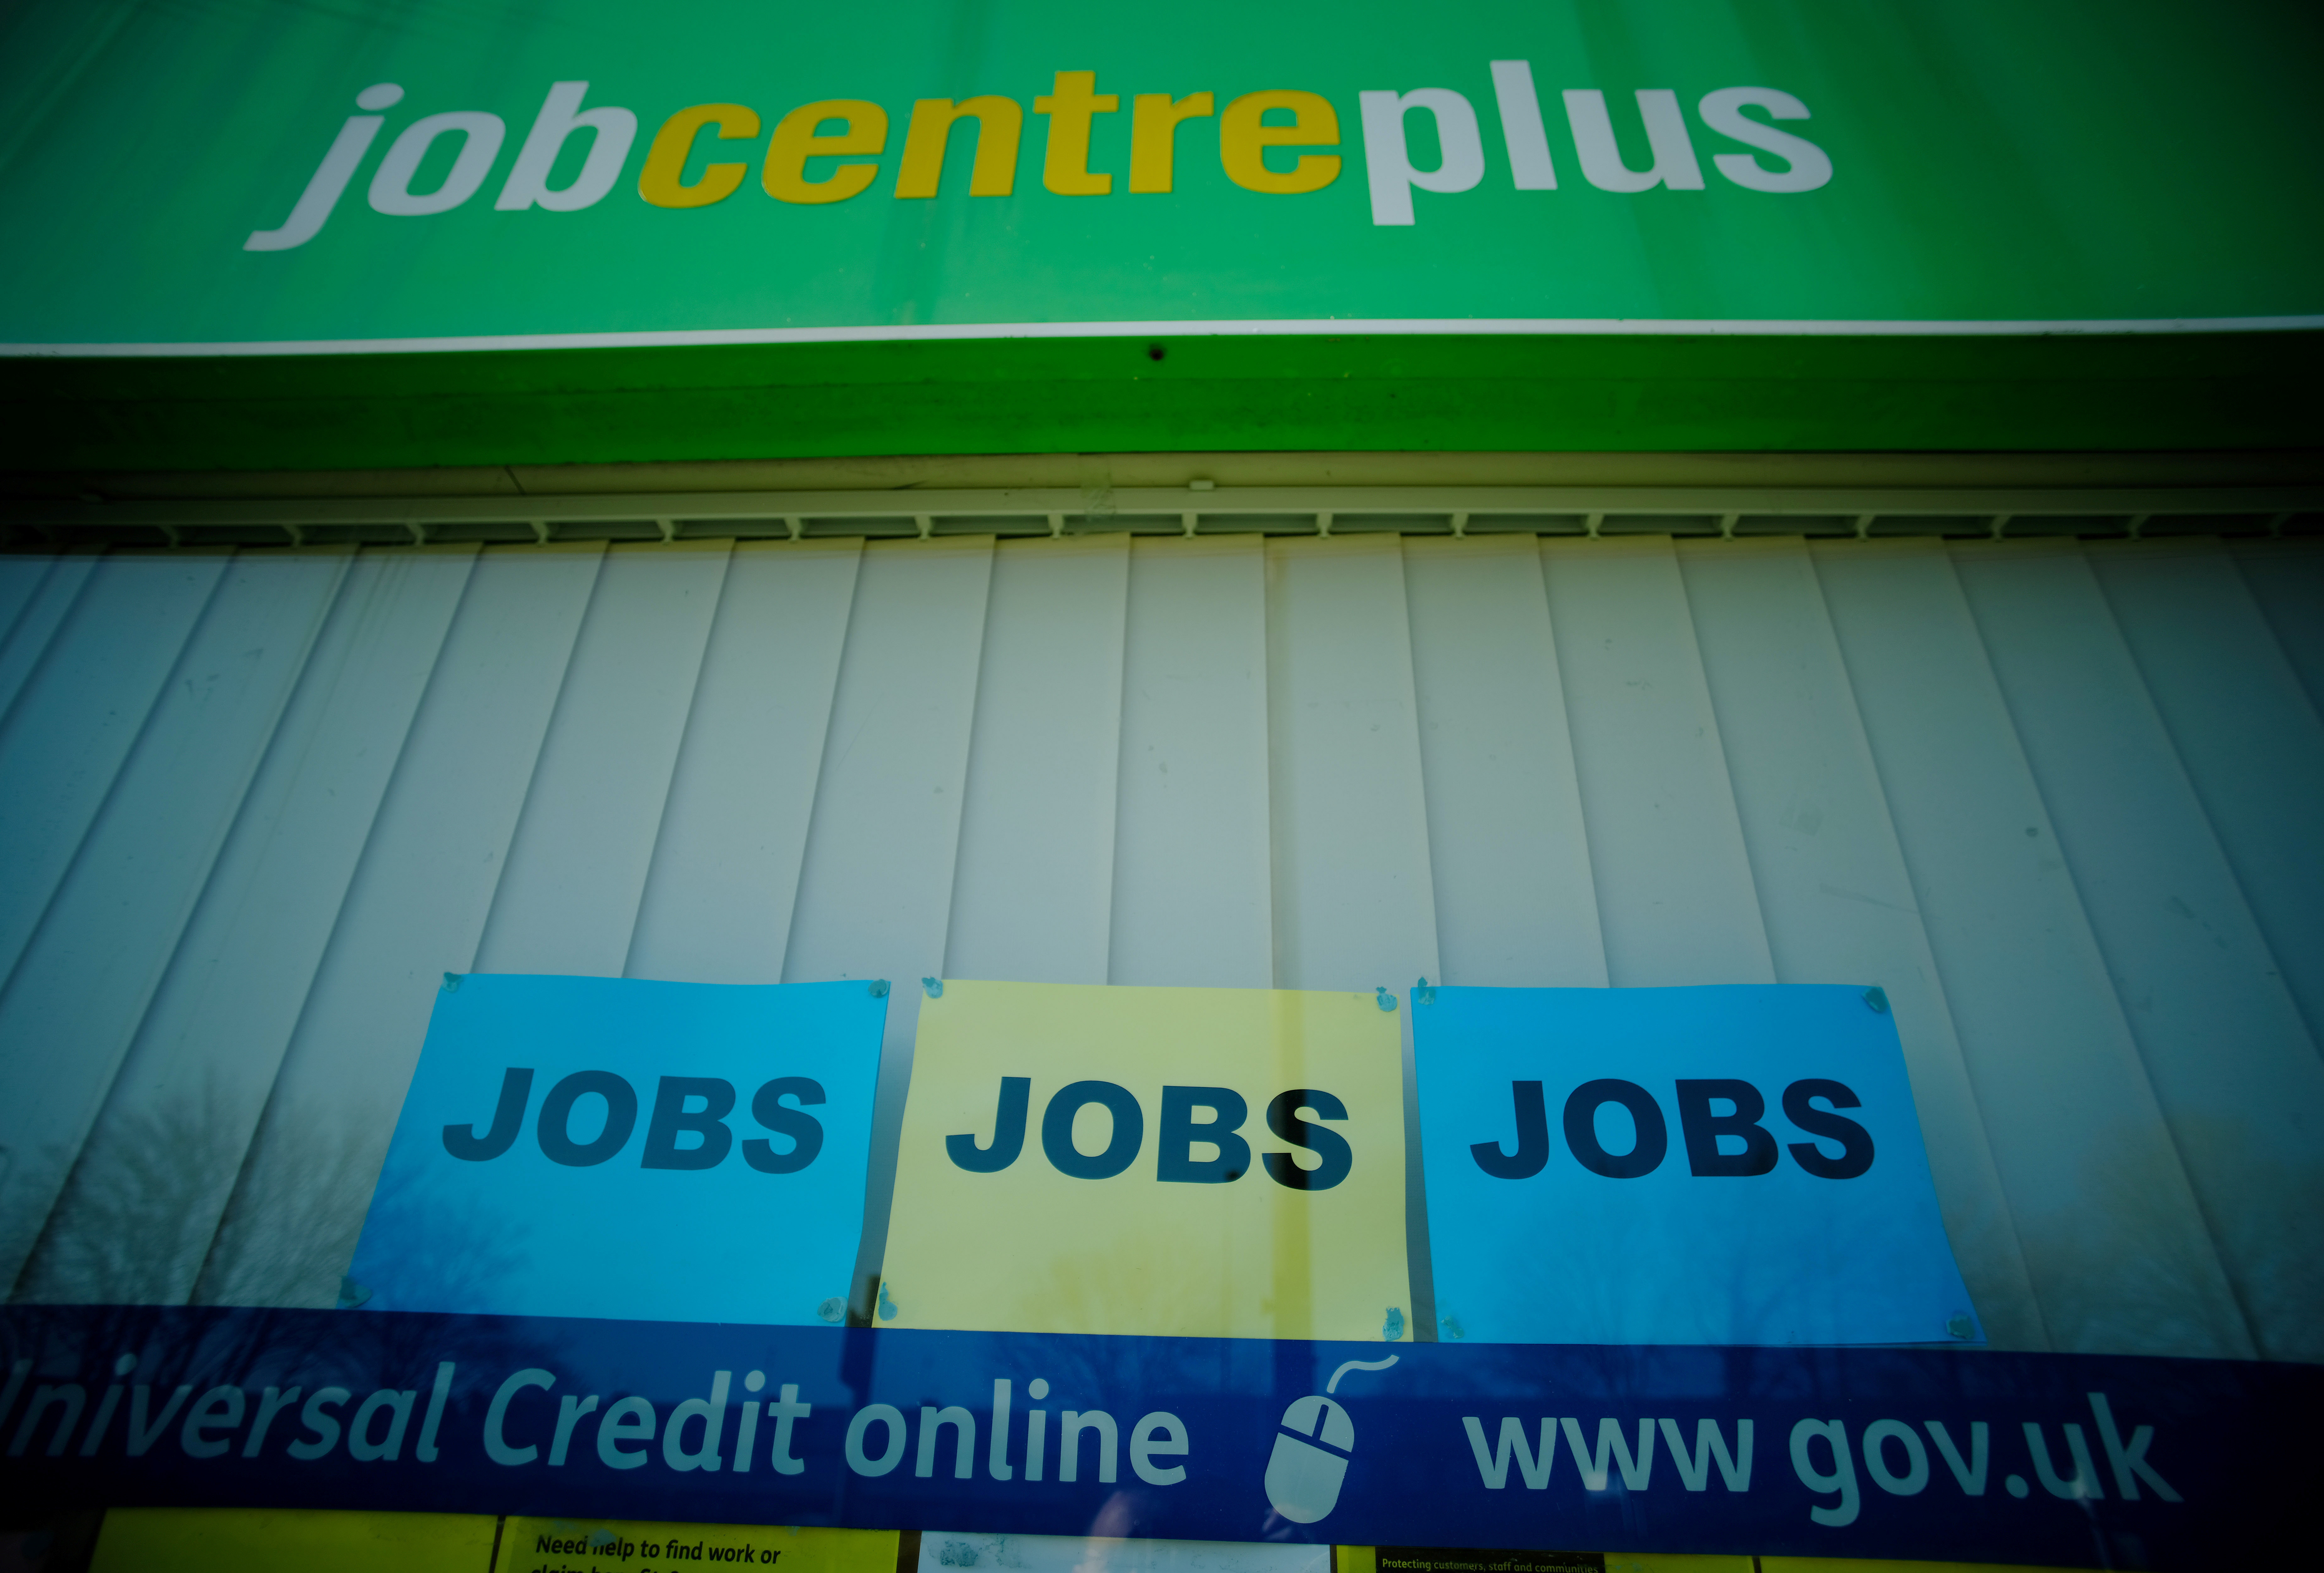 Adverts for jobs are seen in the window of a Jobcentre Plus  in Manchester